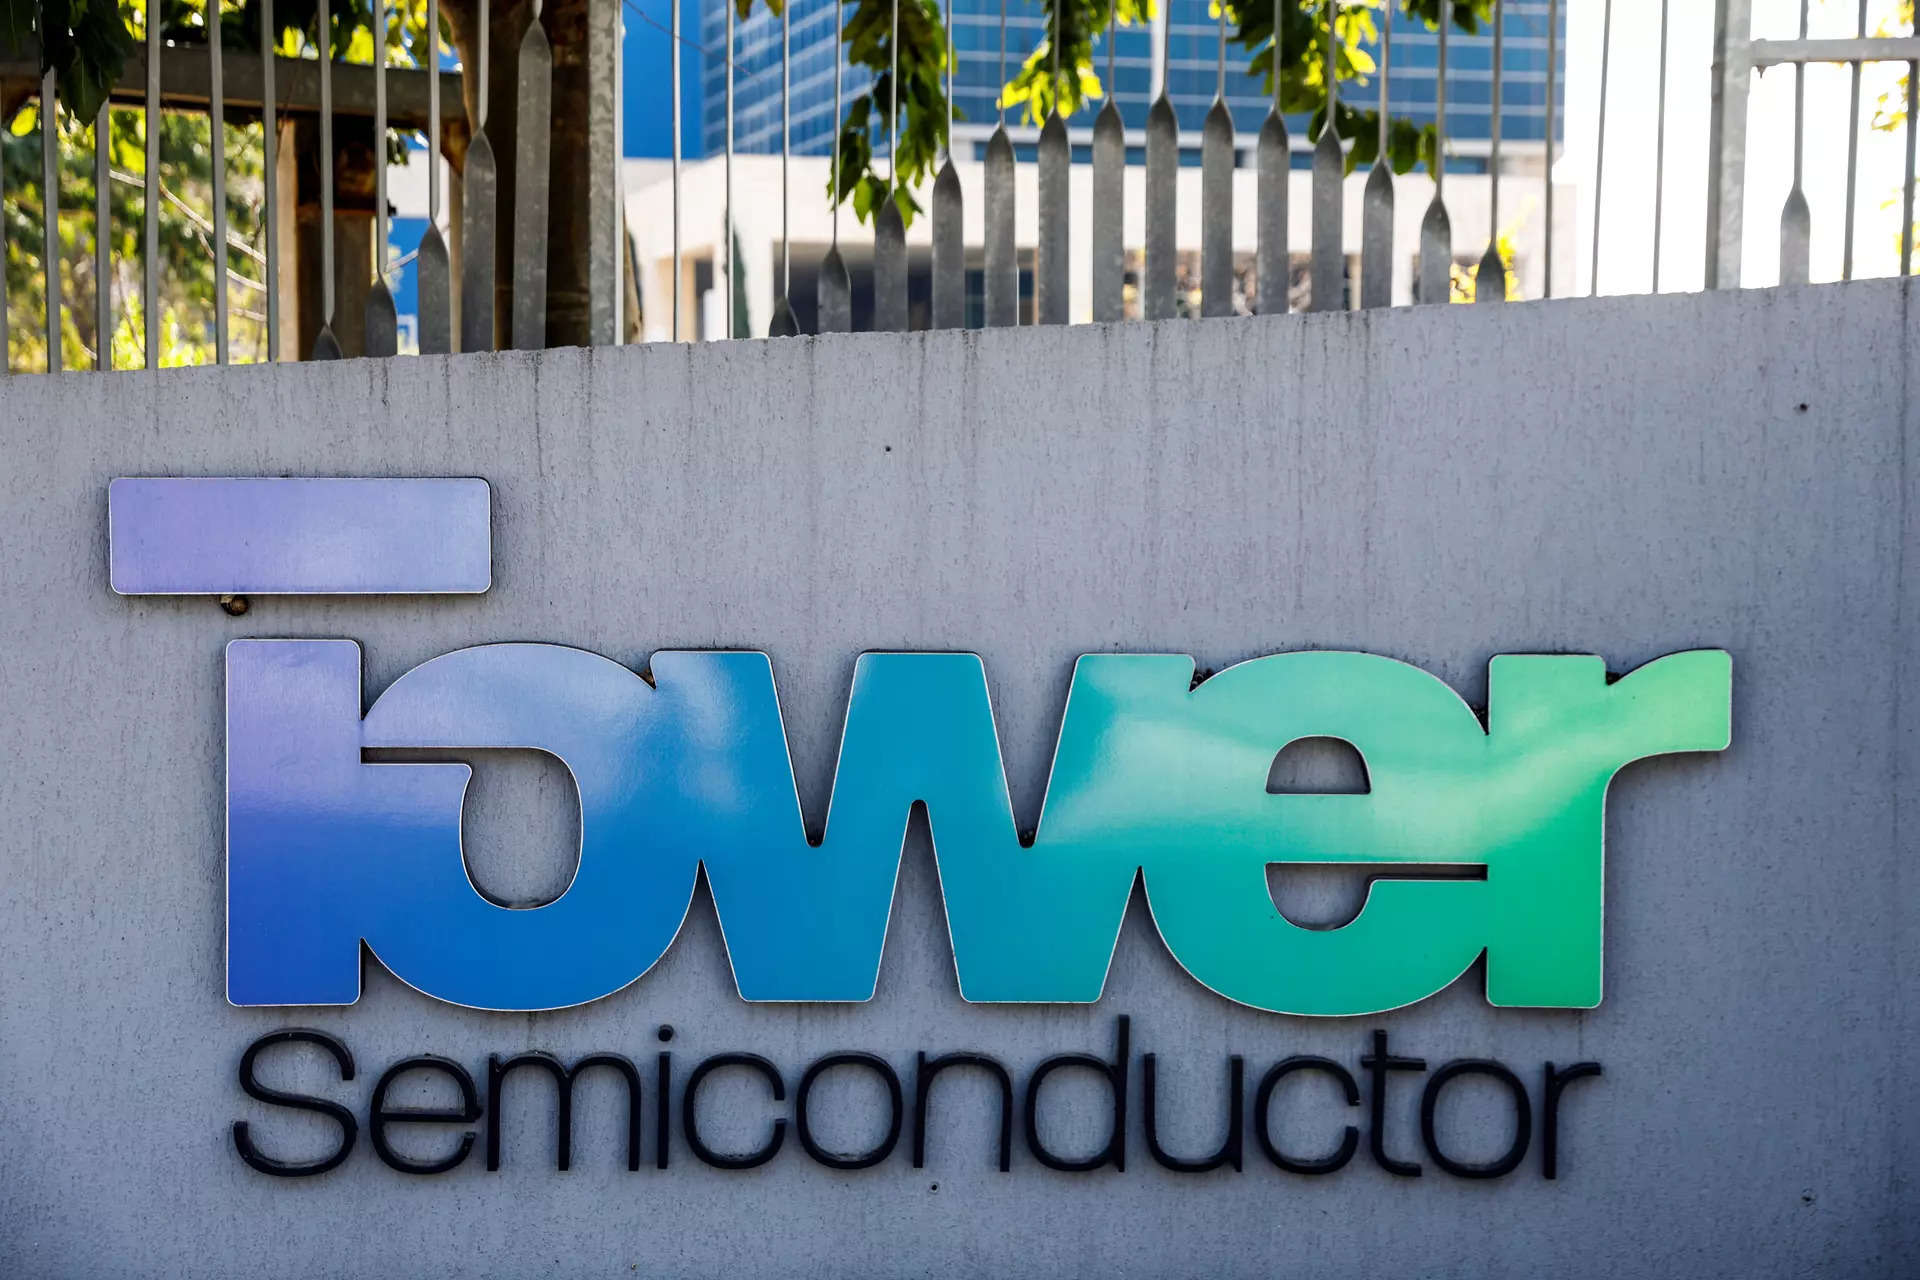 Israel's chipmaker Tower resubmits proposal to set up 65 nm, 40 nm chip fab 